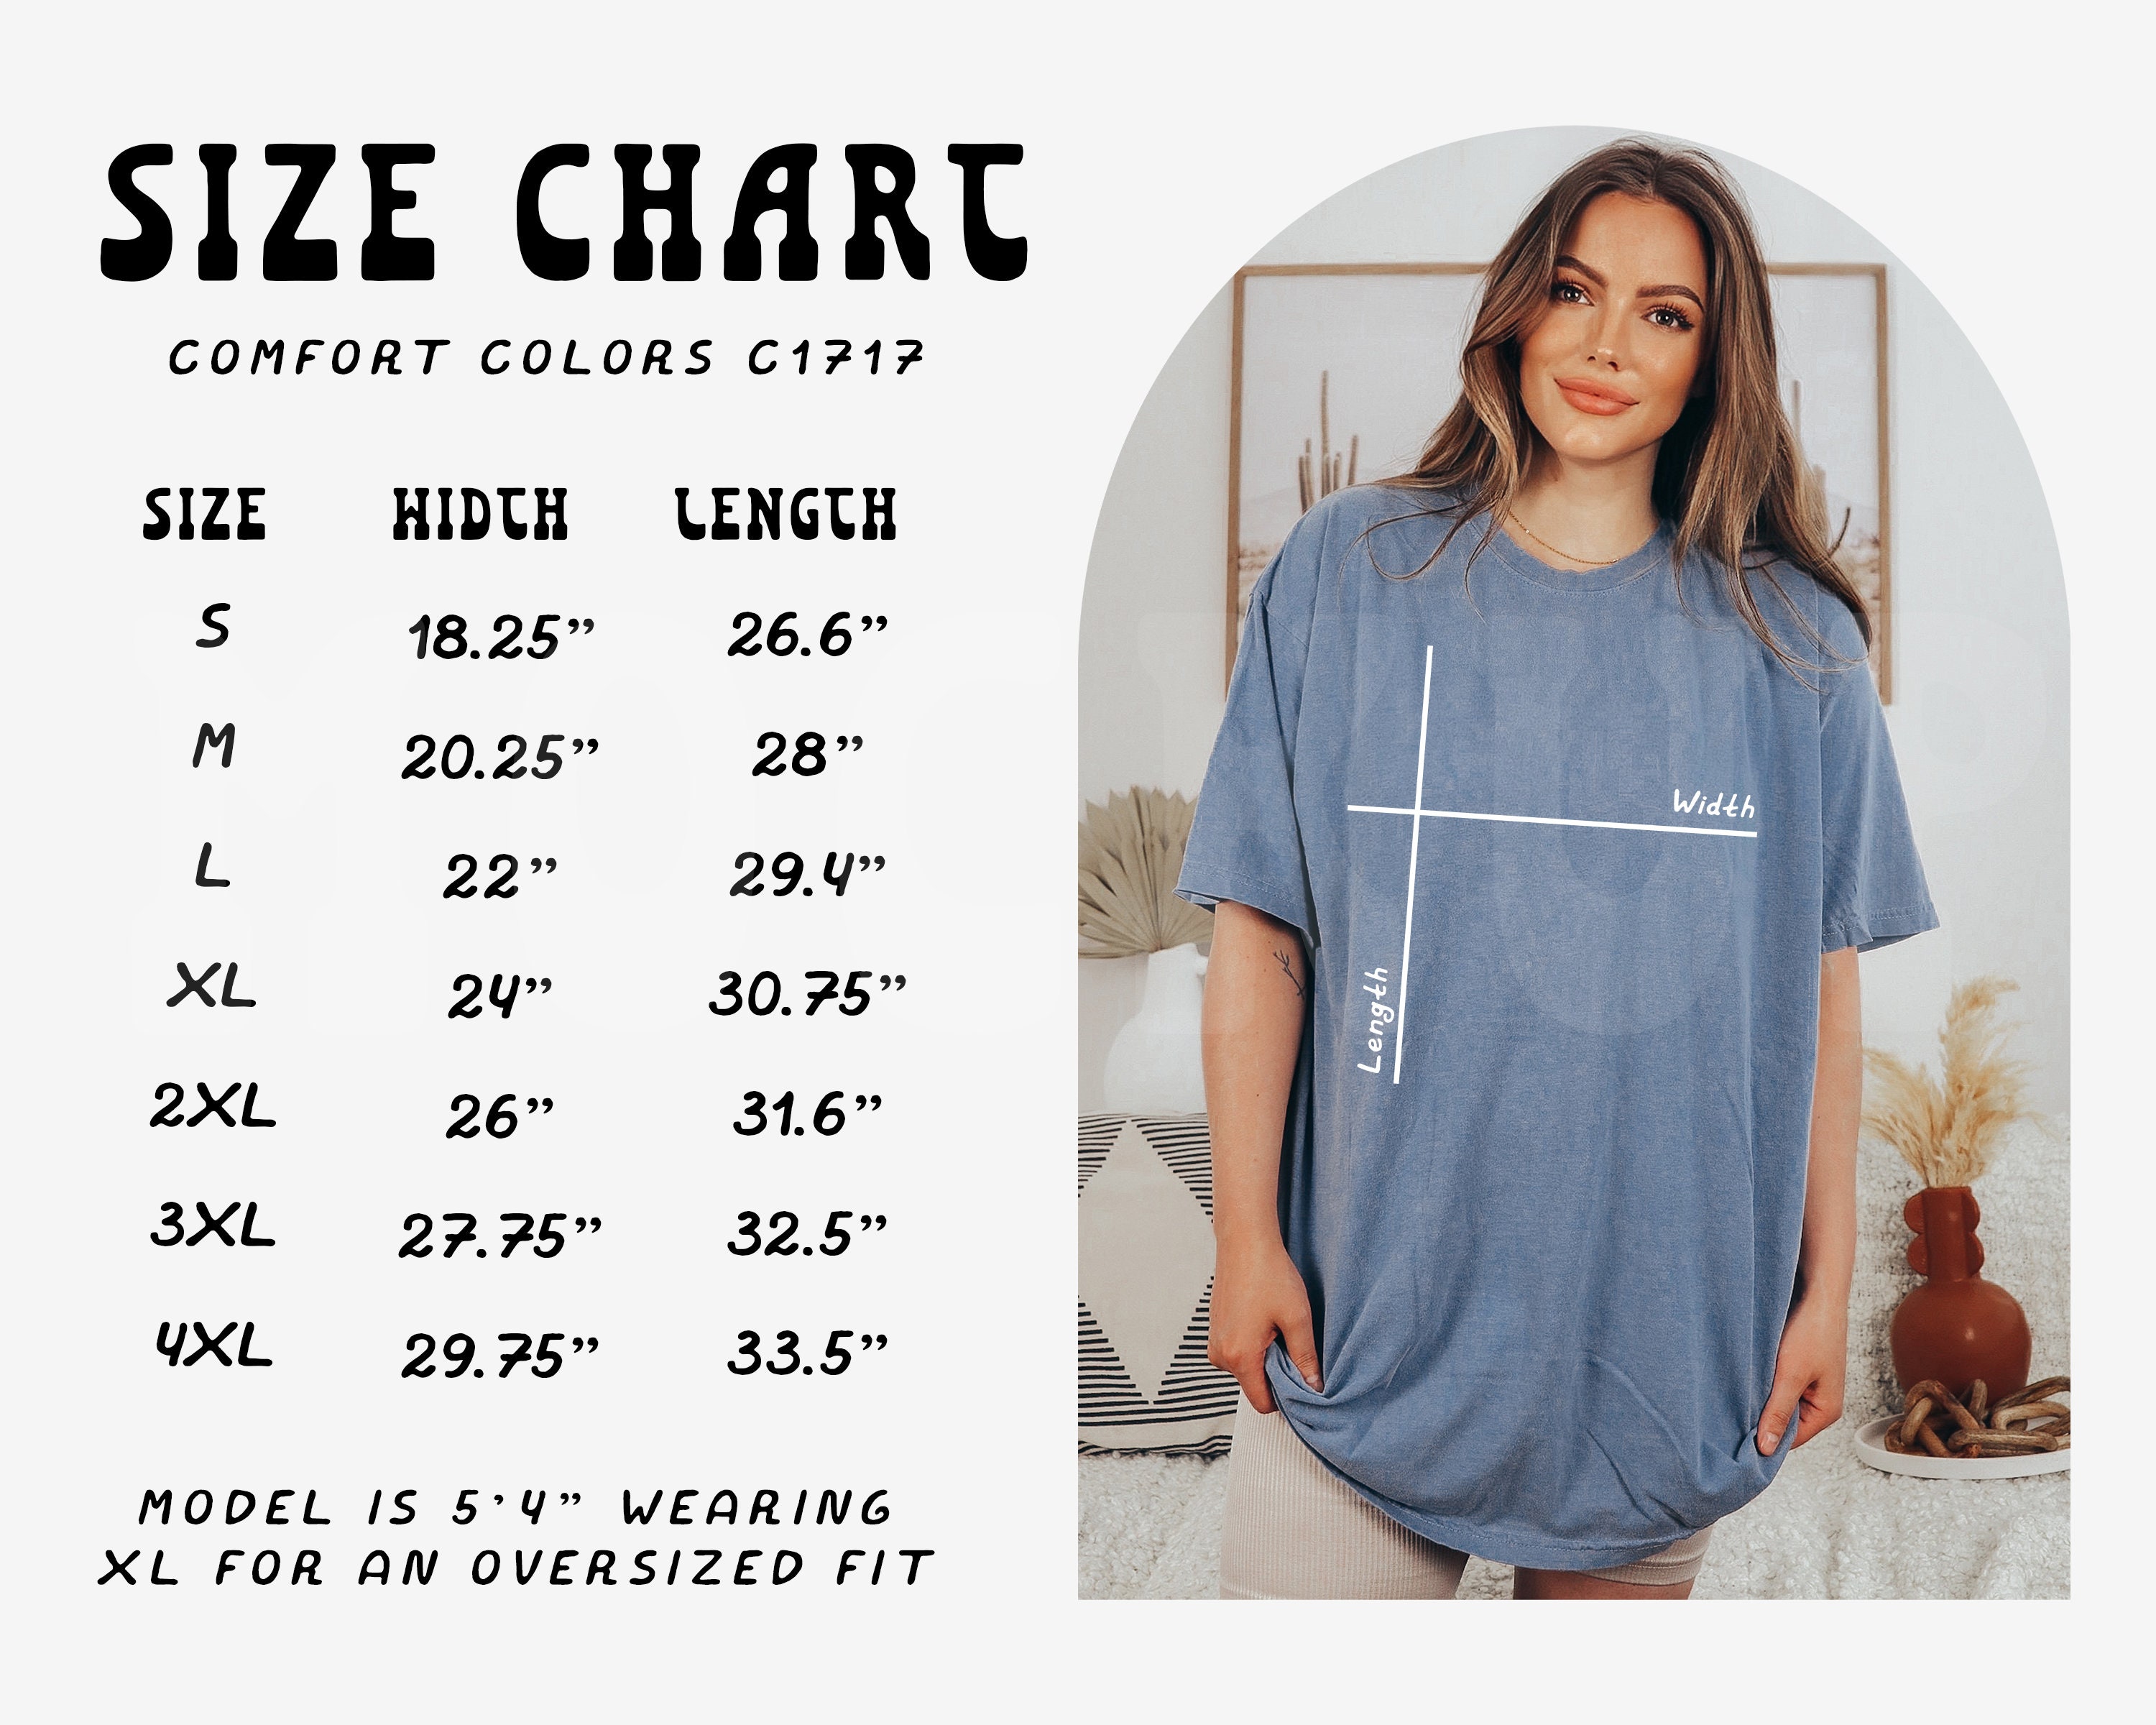 Comfort Colors 1717 T-Shirt Color and Size Chart, Comfort Colors T-Shirt  Color Chart, Comfort Colors Size Chart